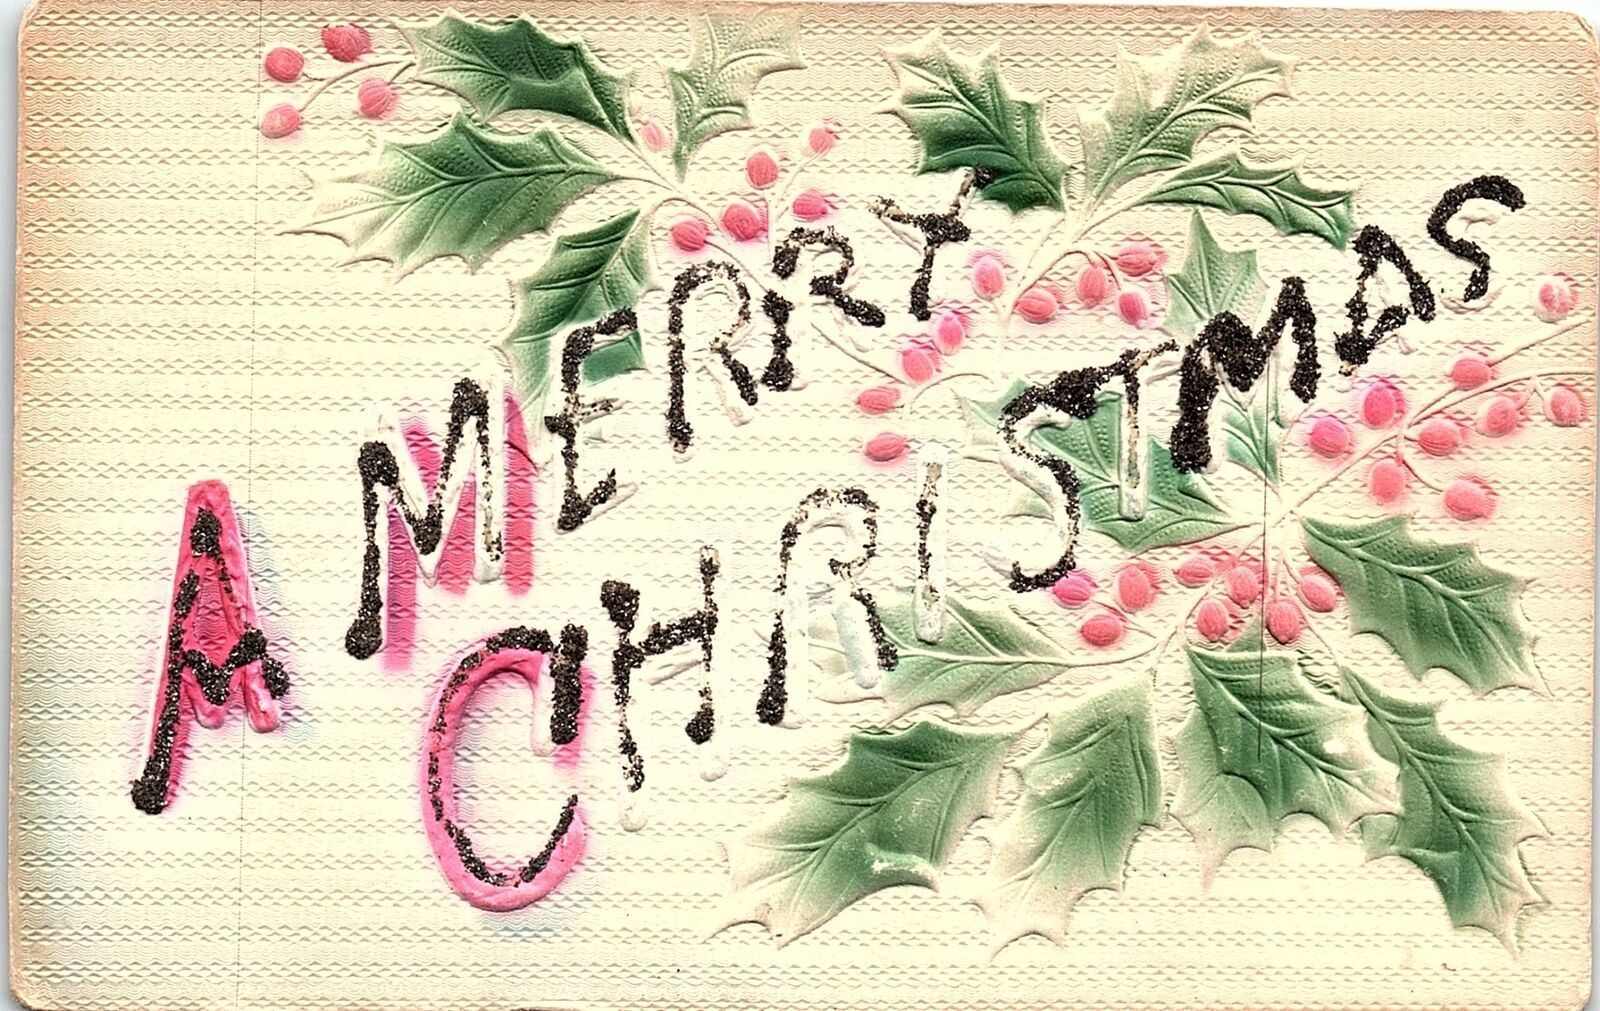 c1910 MERRY CHRISTMAS HOLLY TINSELED HEAVILY EMBOSSED POSTCARD 39-242